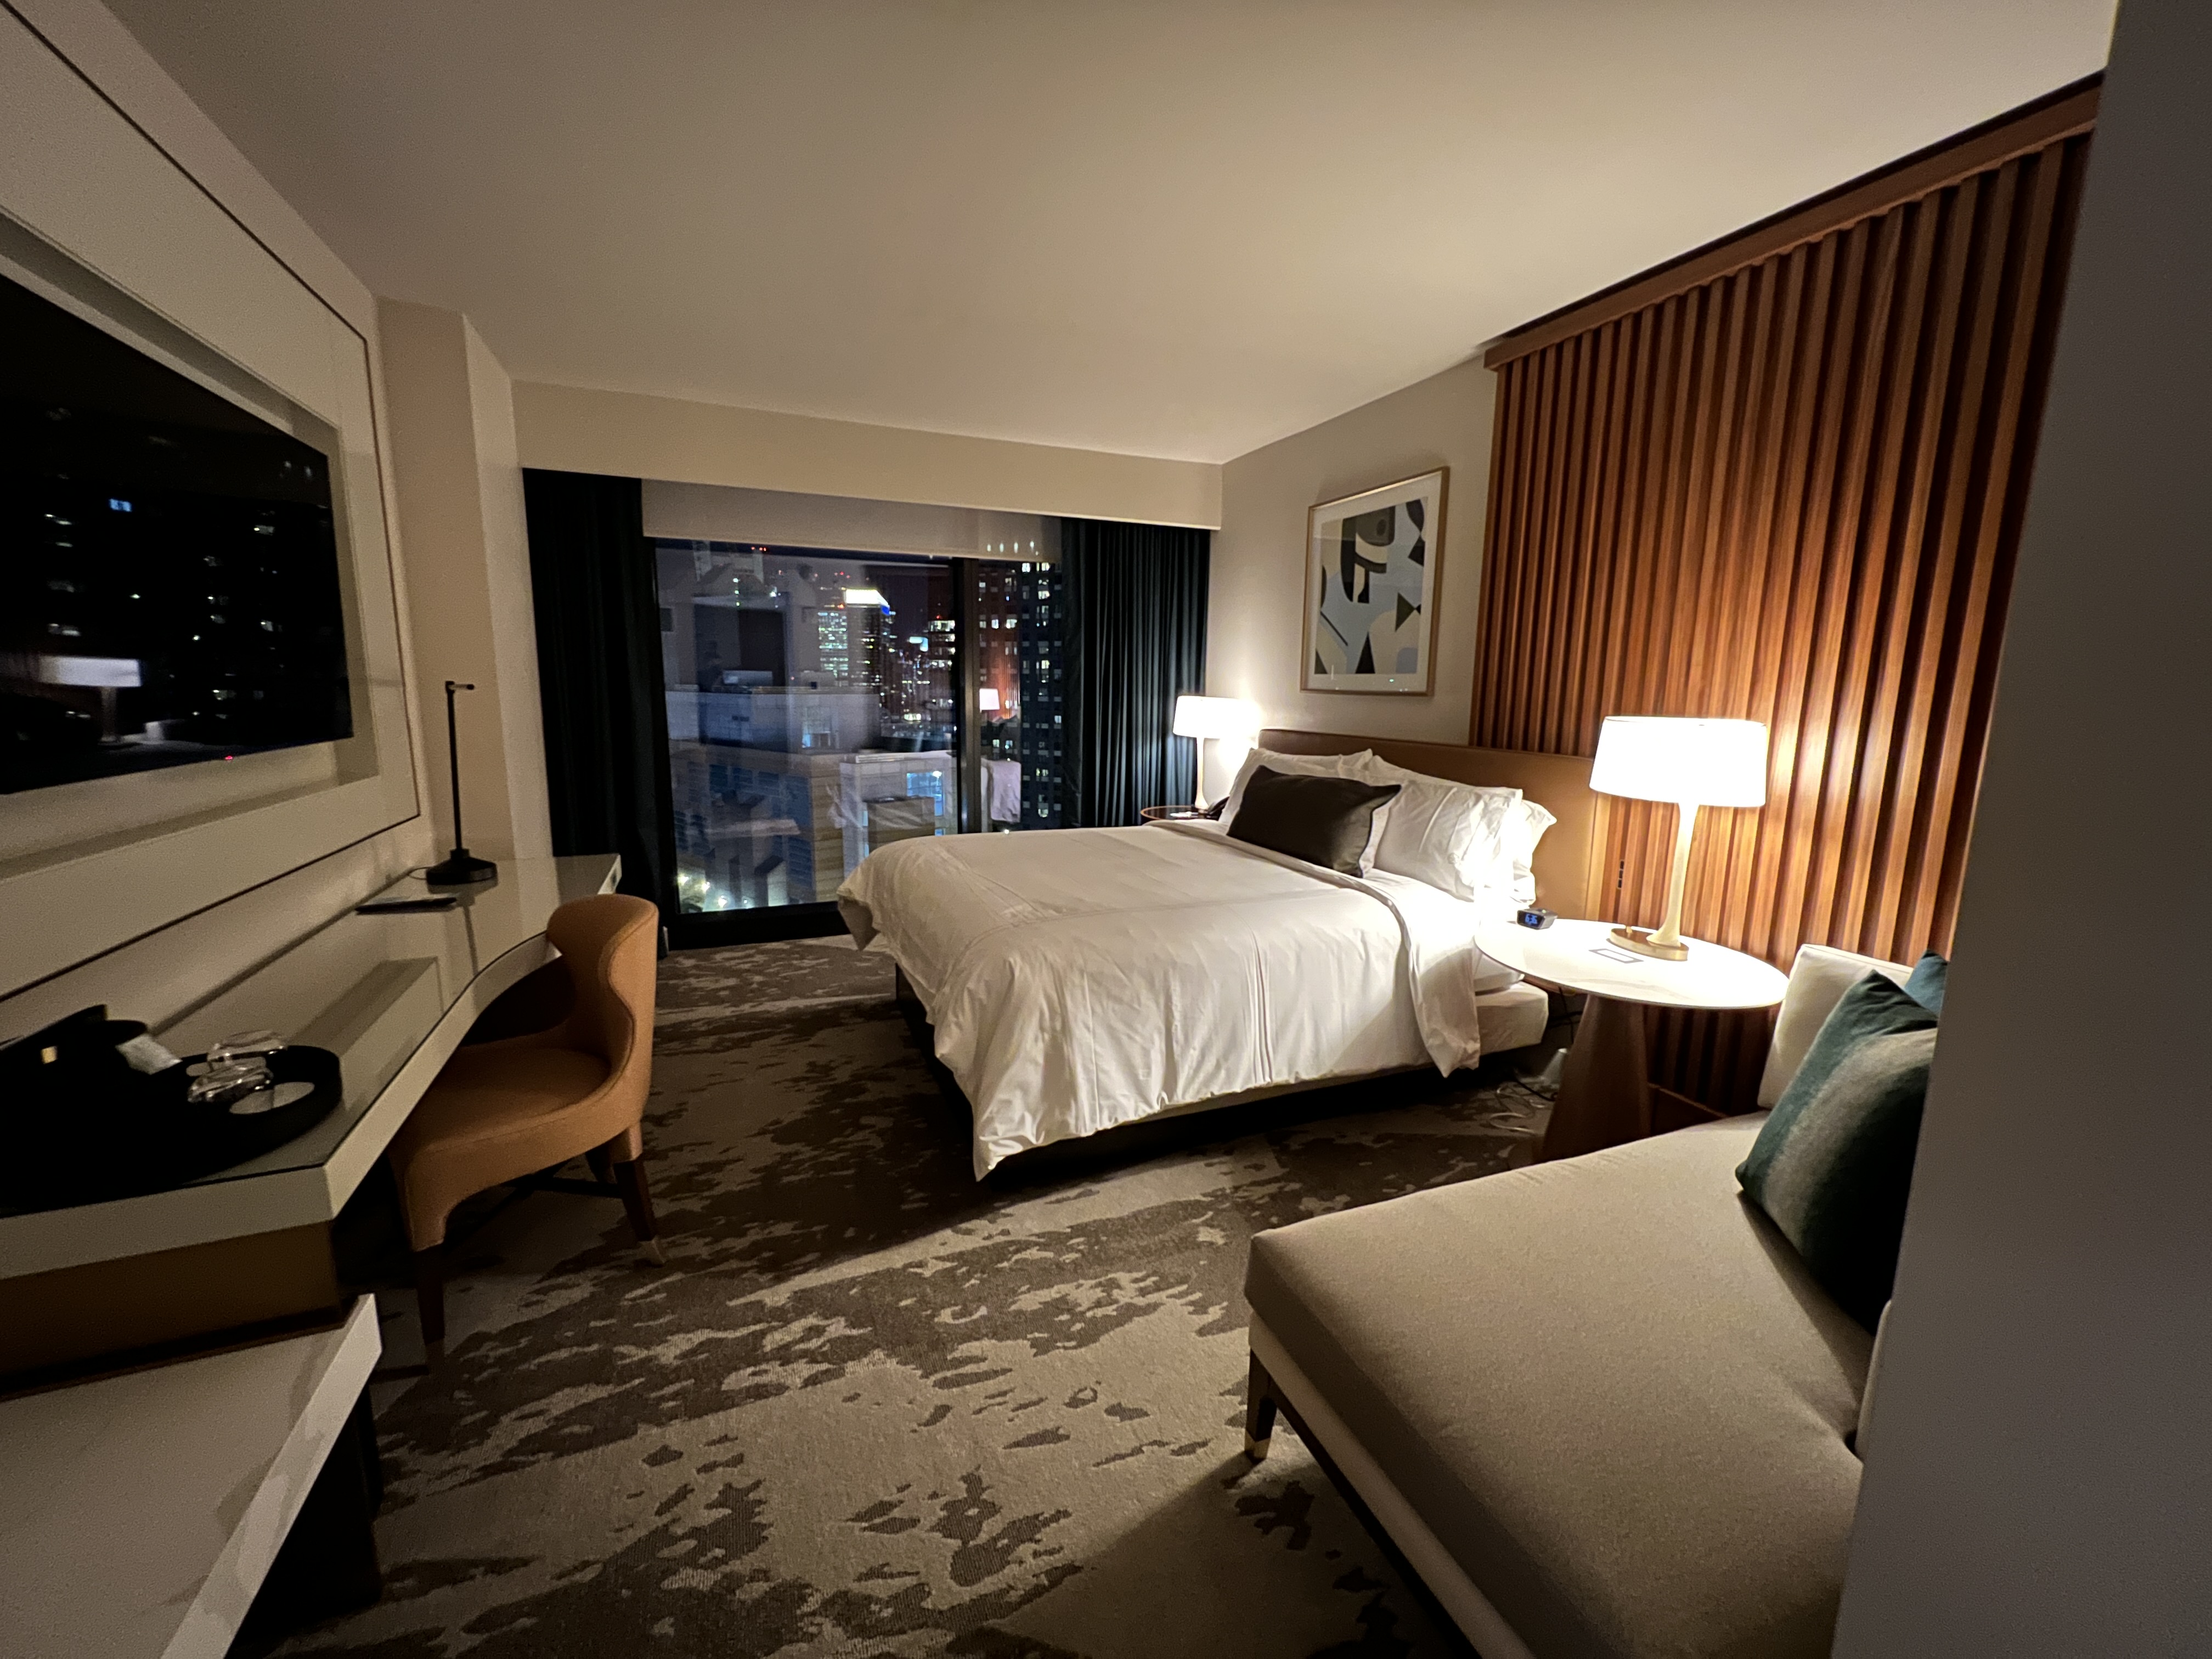 A guest room at the new Omni Boston Hotel at the Seaport.